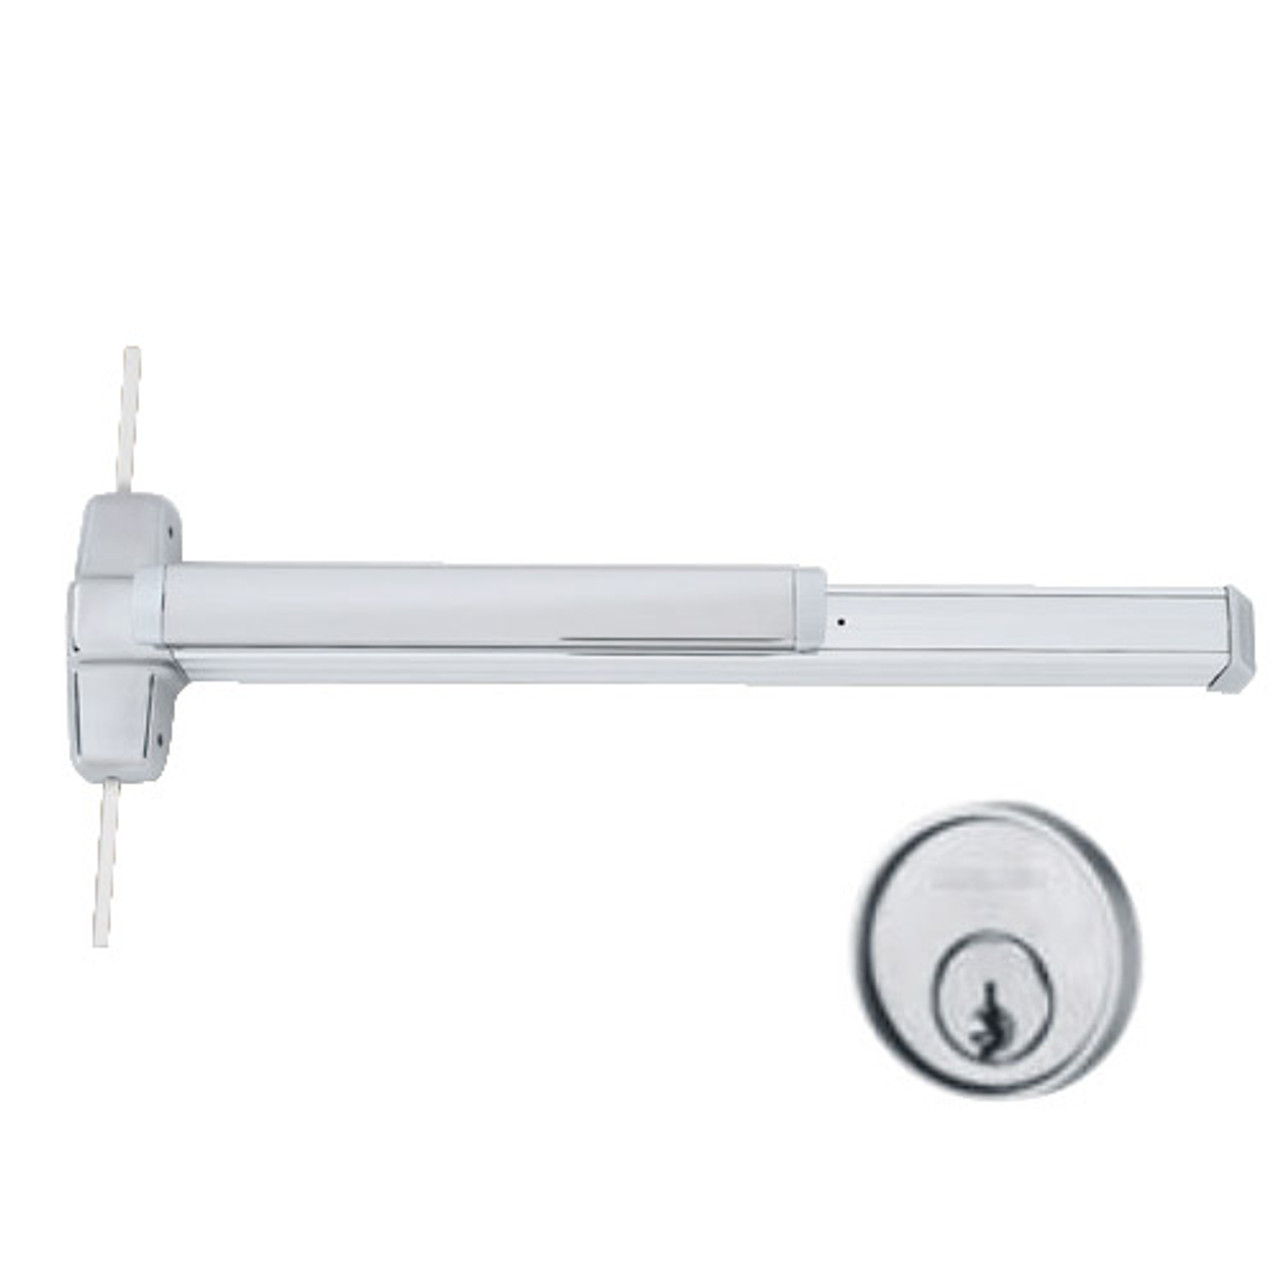 9848NL-OP-F-US28-4 Von Duprin Exit Device in Anodized Aluminum